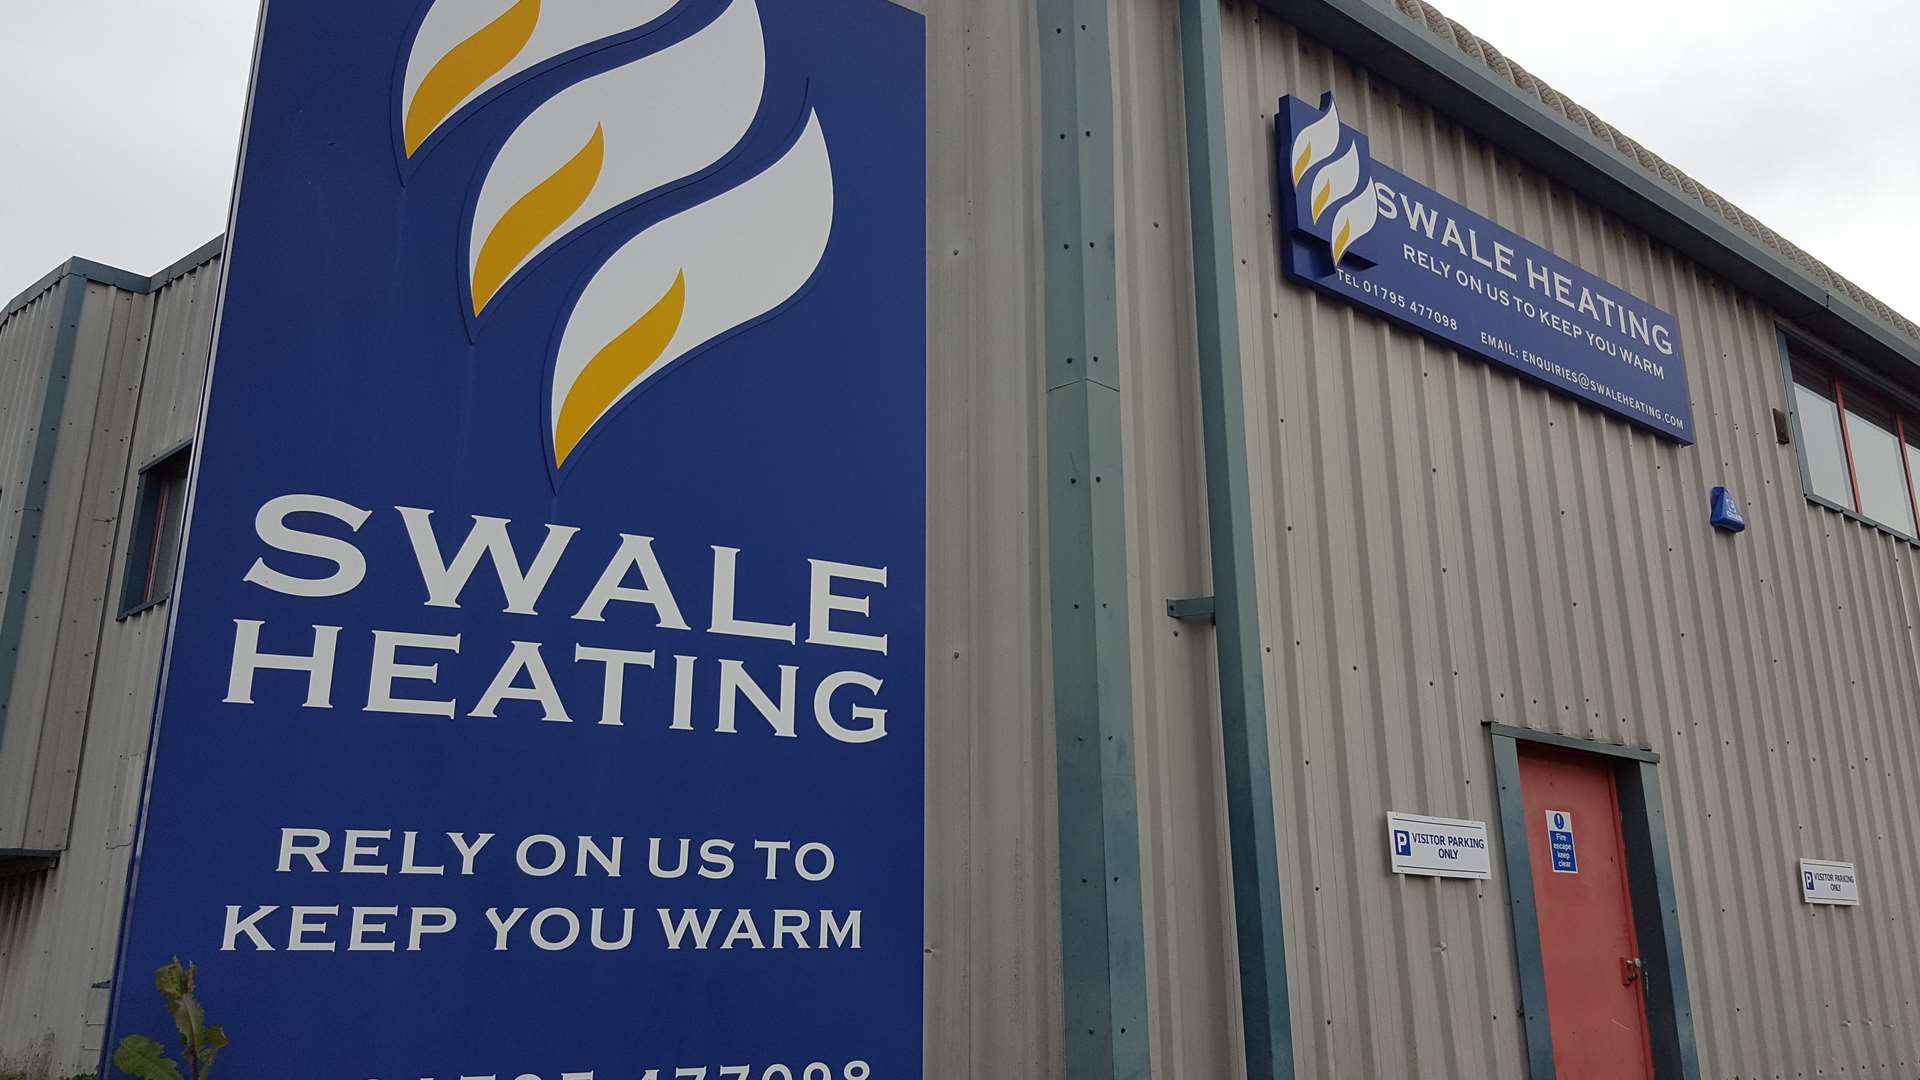 Swale Heating's headquarters at Eurolink Business Park in Sittingbourne